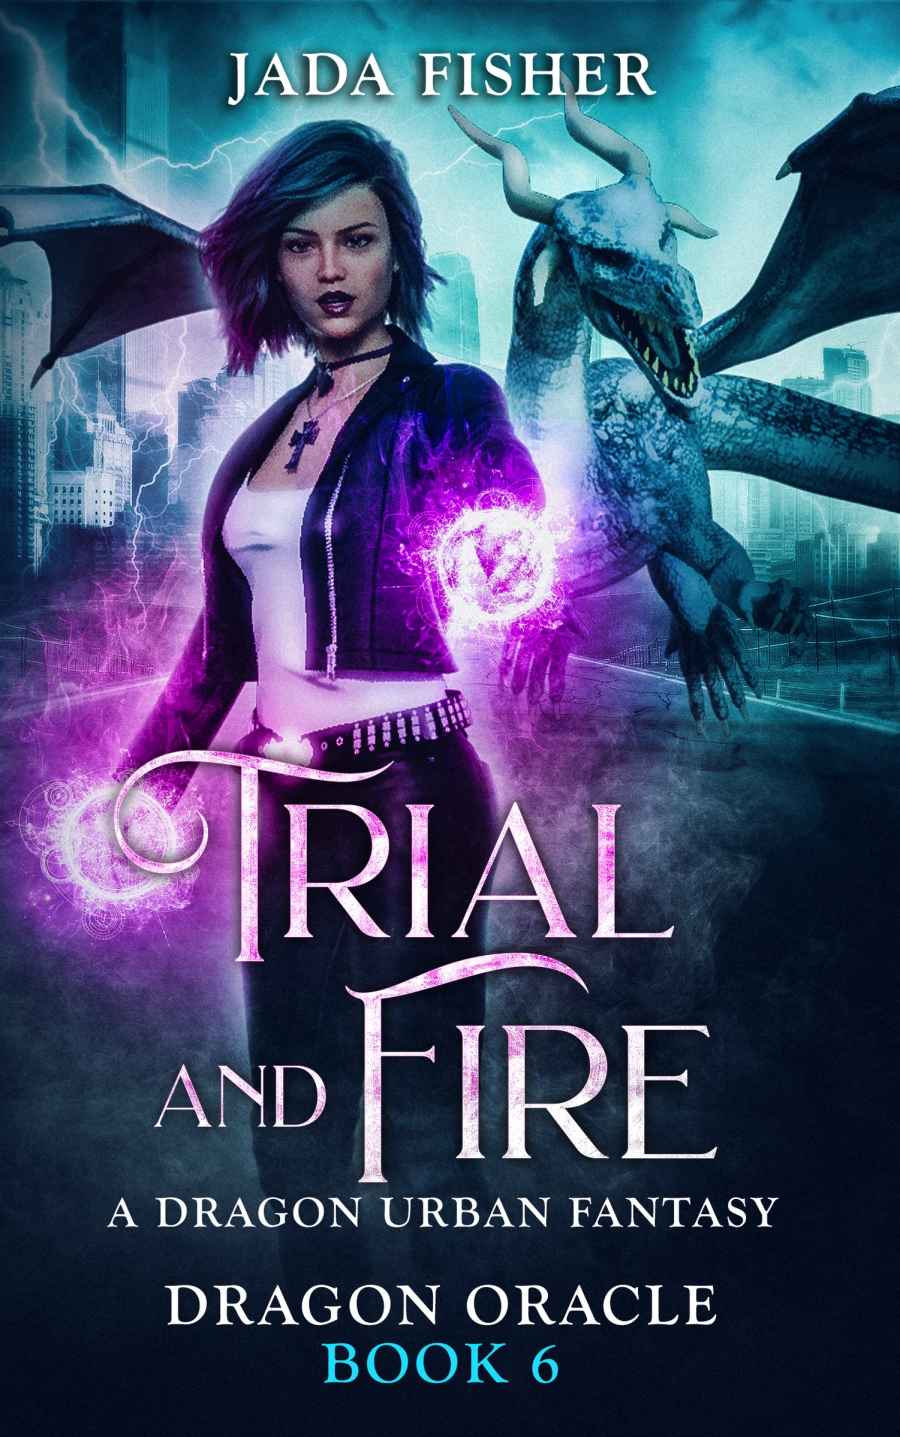 Dragon Oracle: Trial and Fire